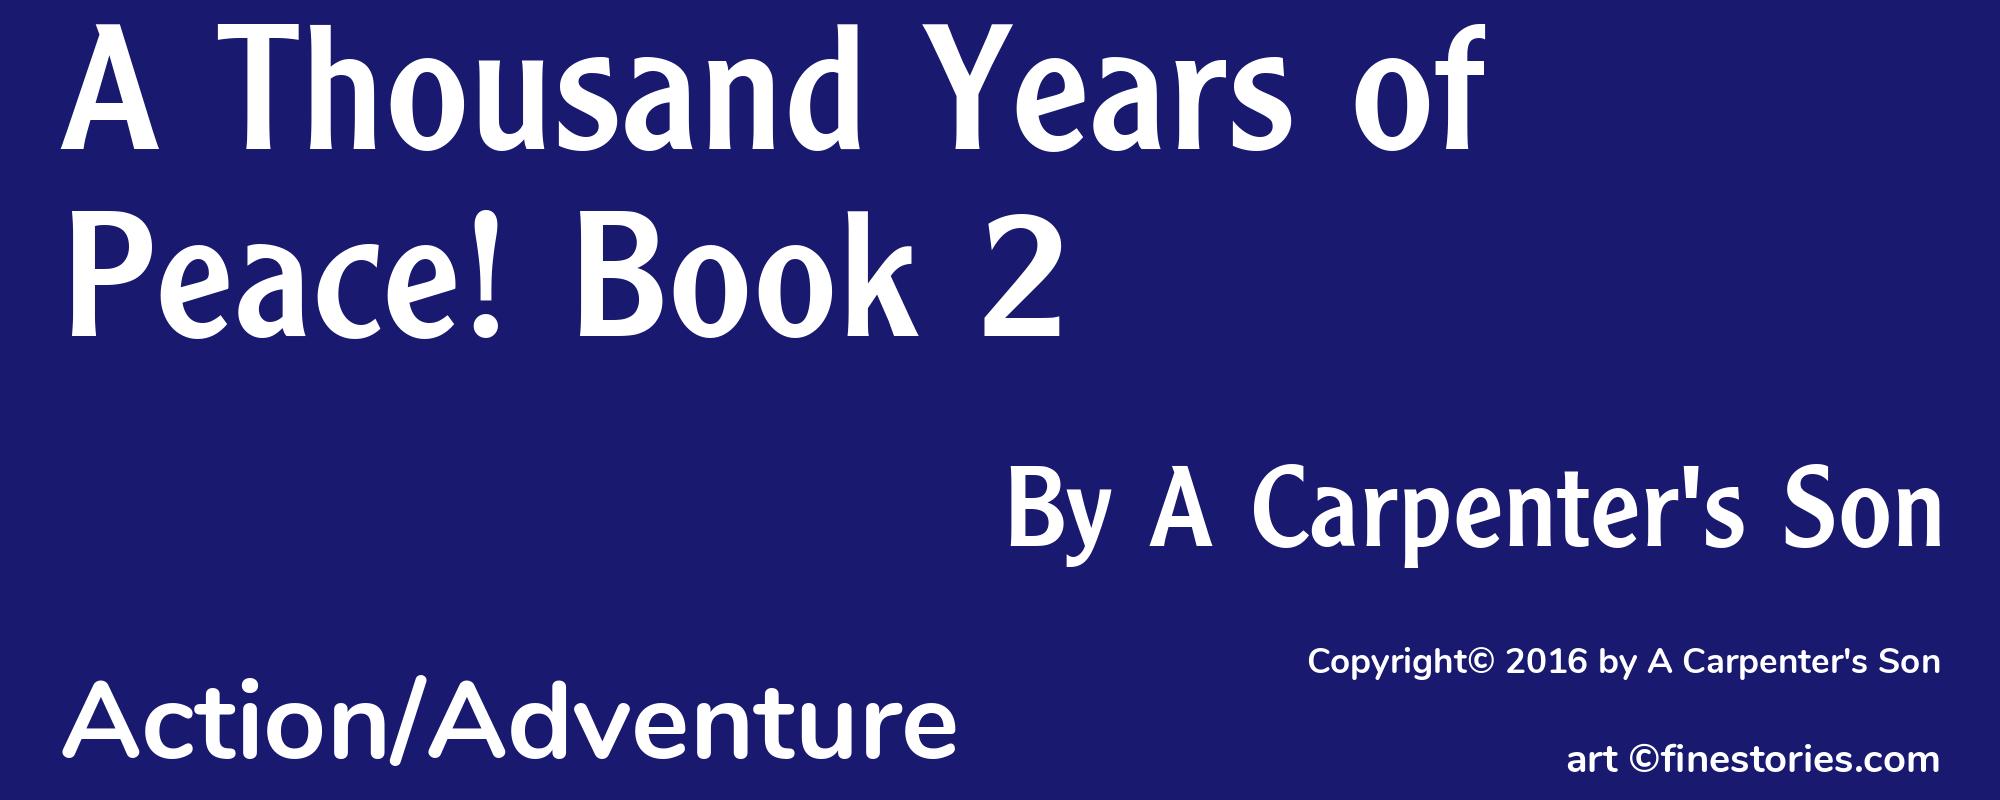 A Thousand Years of Peace! Book 2 - Cover